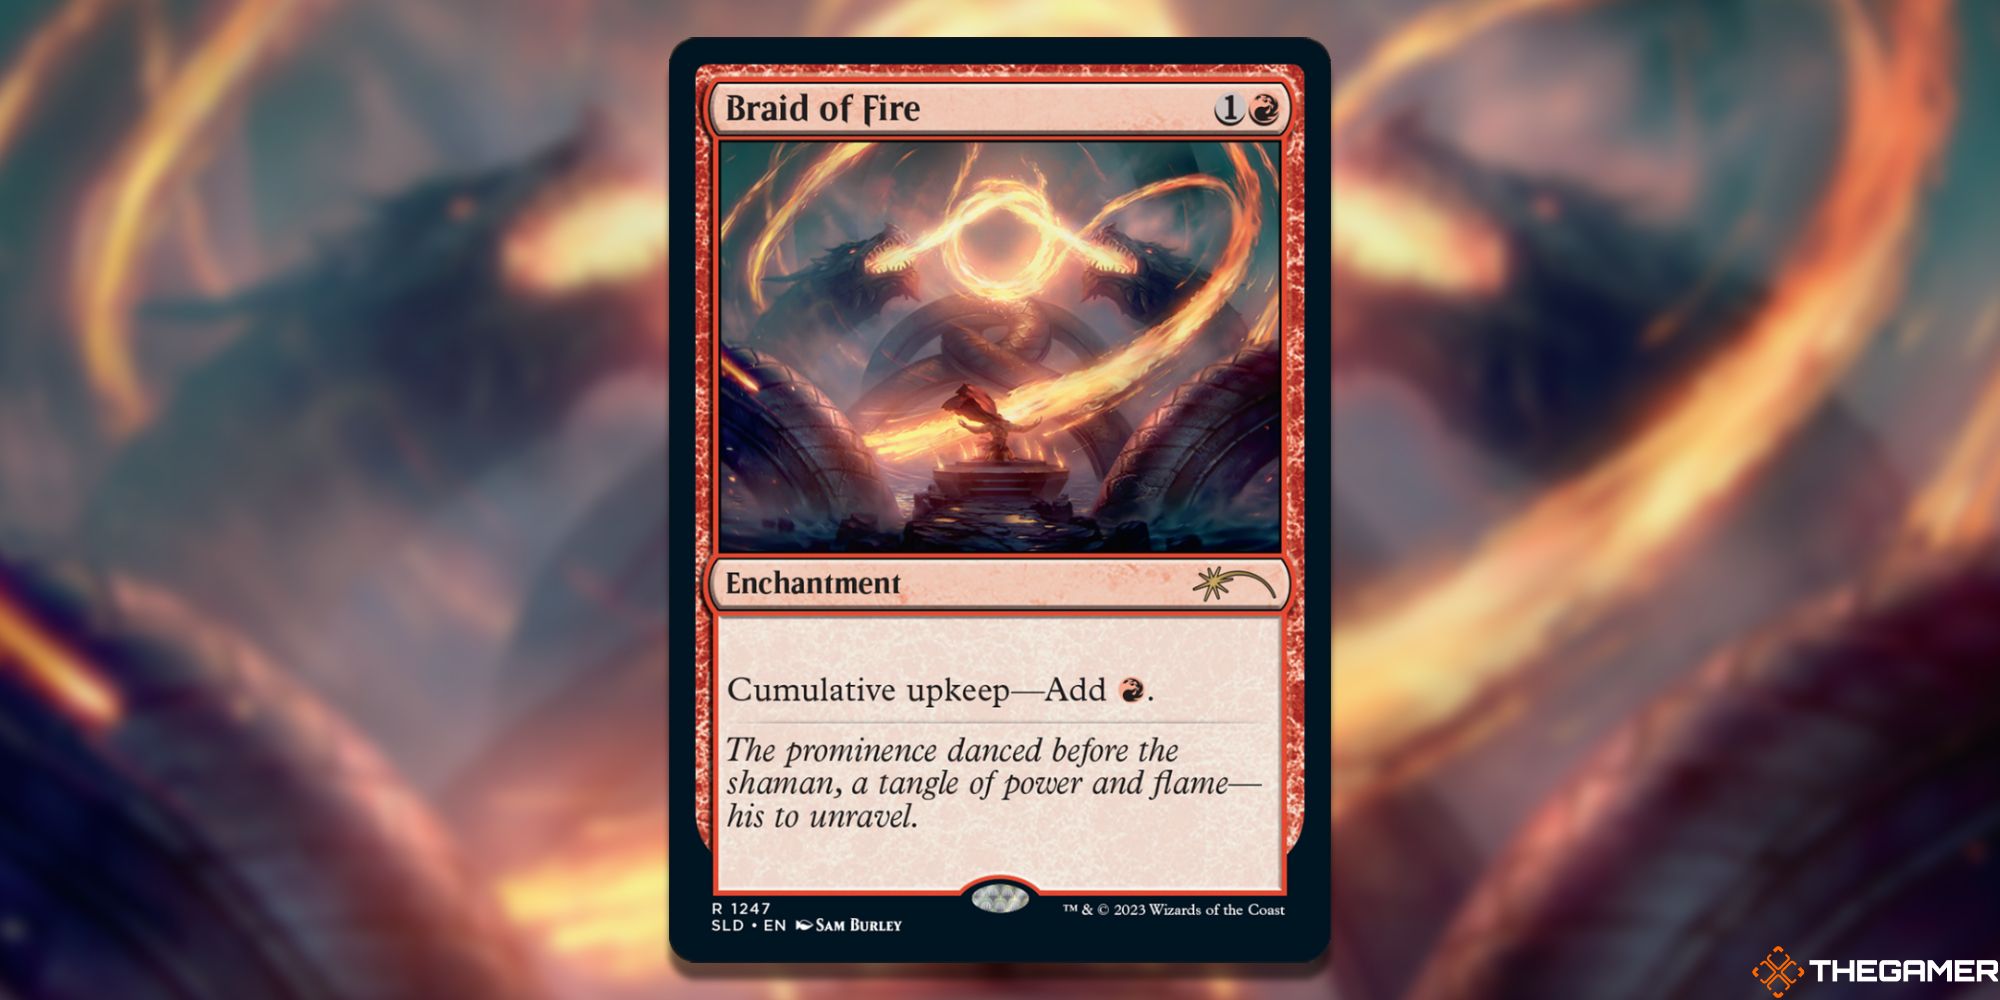 The card Braid Of Fire from Magic: The Gathering.